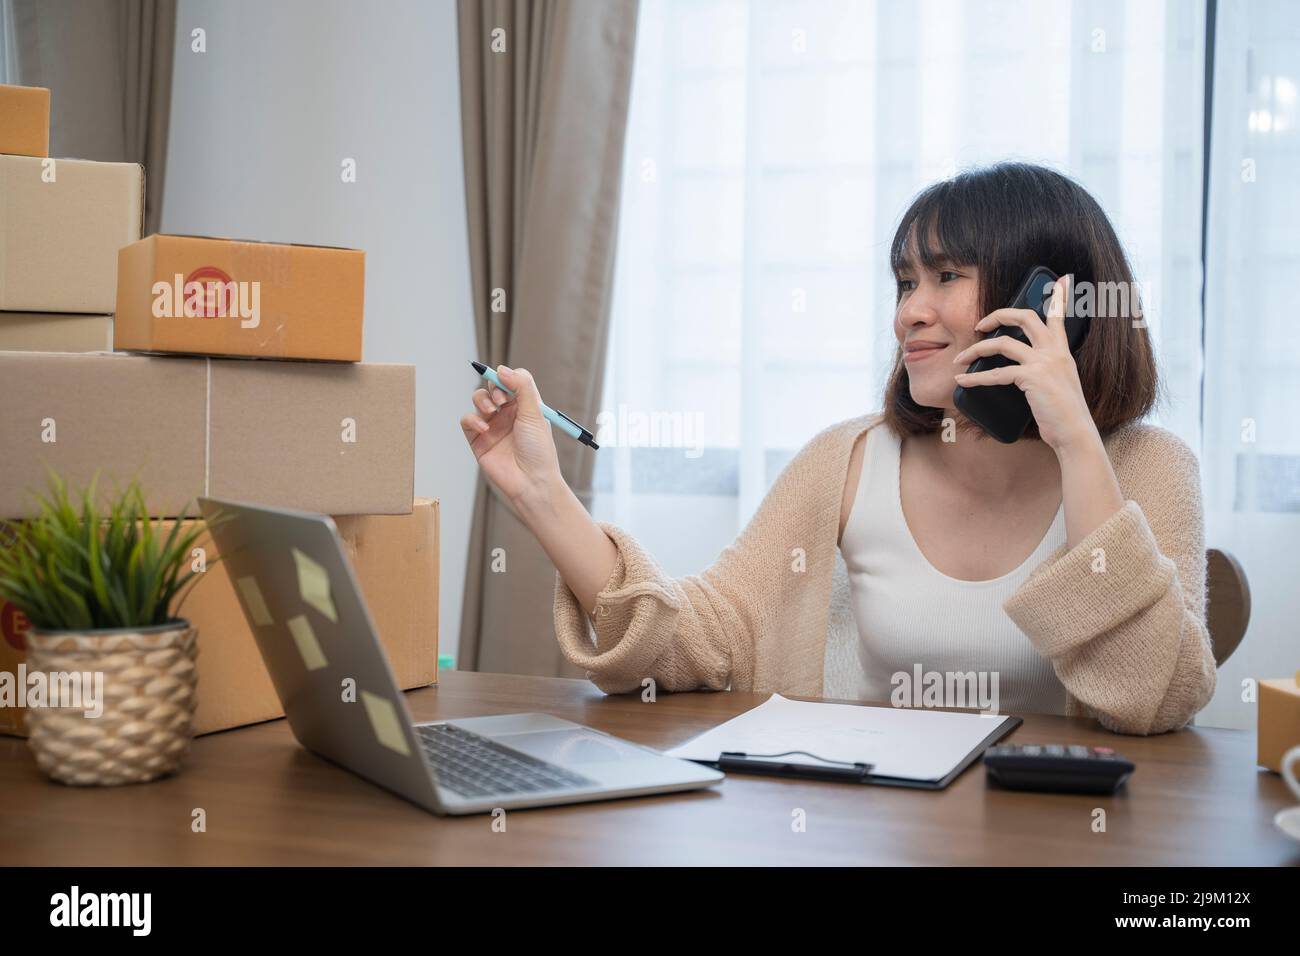 Young Asian female using her laptop and working at home, Small business female owner or Start up small business entrepreneur working online marketing Stock Photo